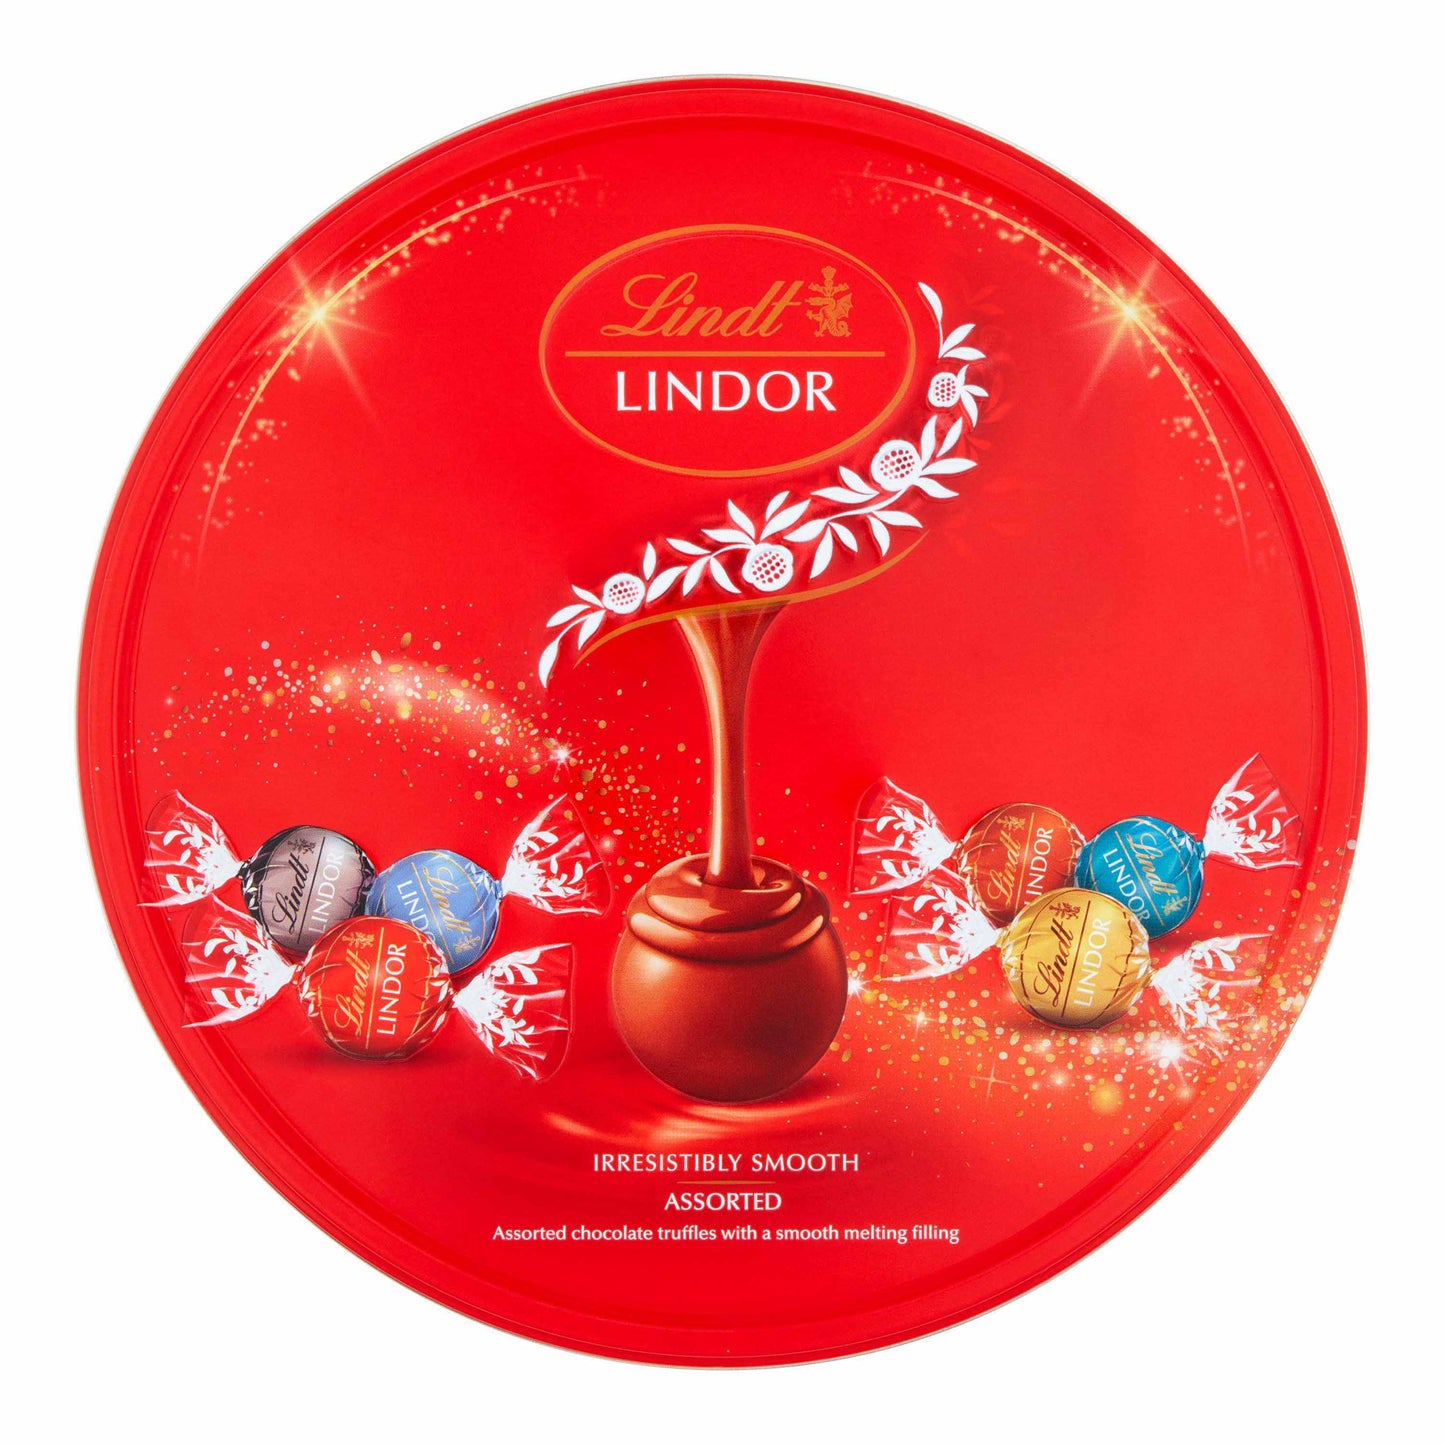 Lindt Lindor Assorted Chocolate Truffles Tin - 450g - British Gifts